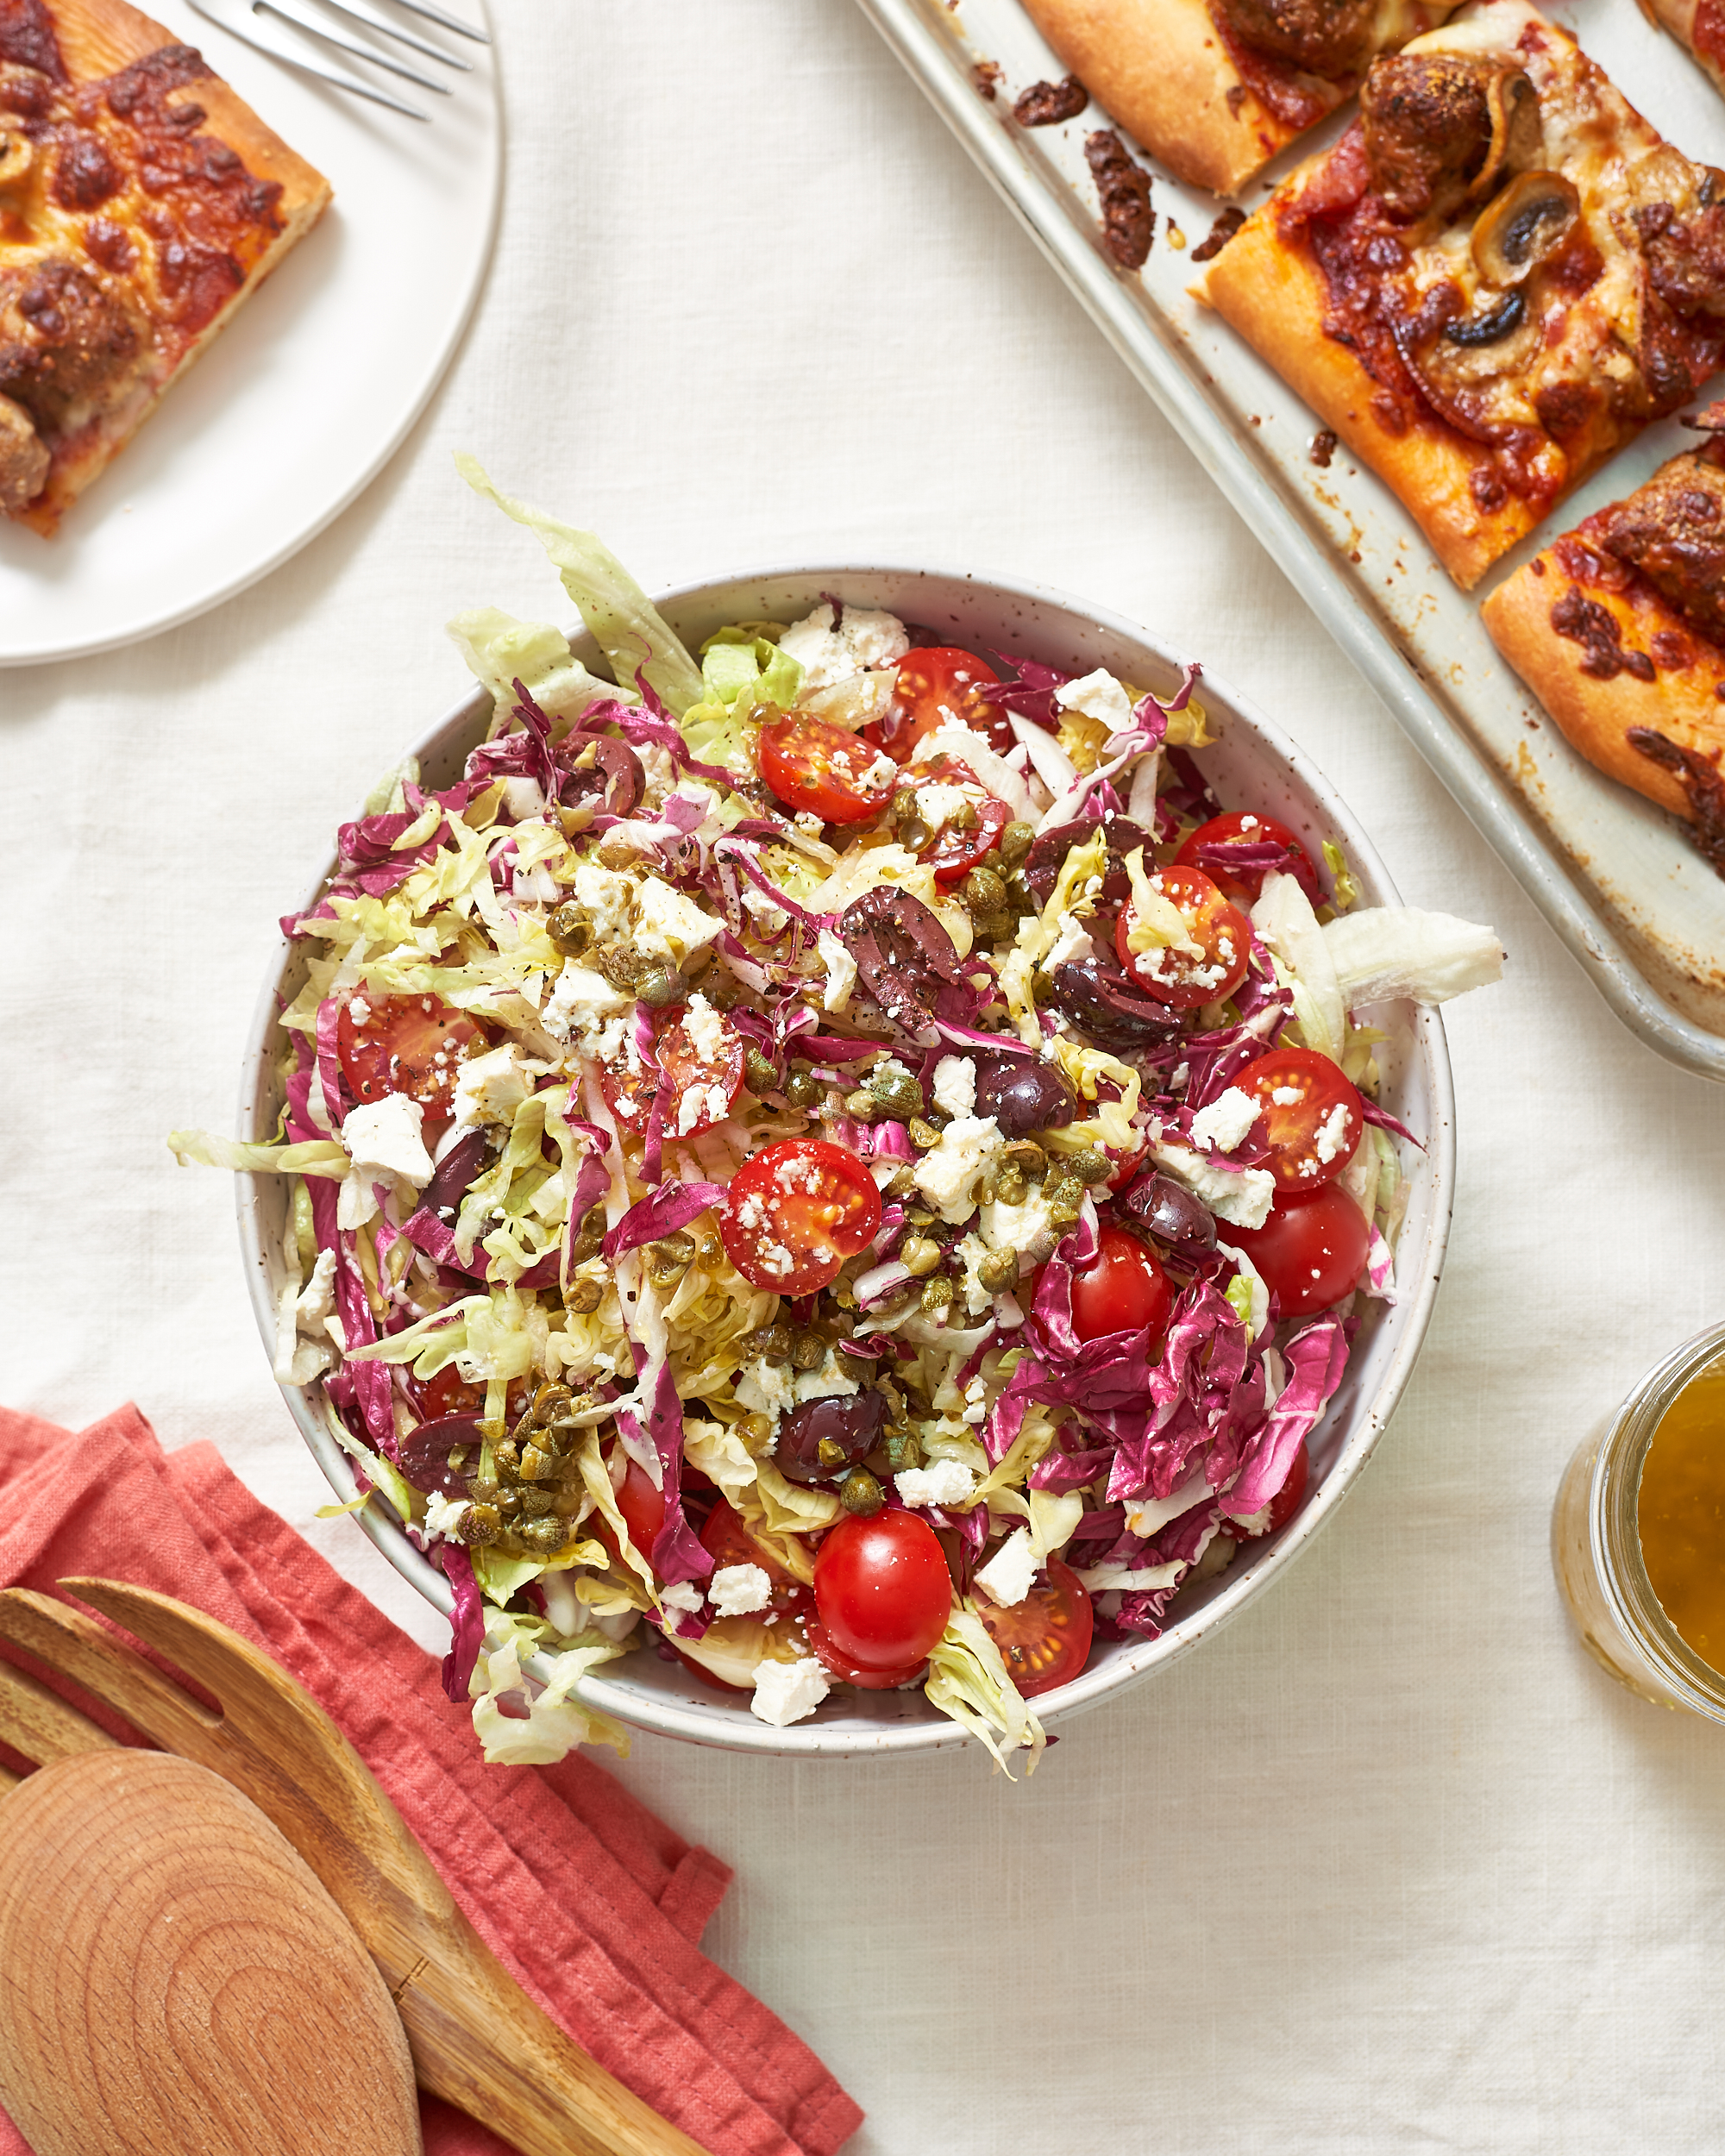 what pizza places have salads?